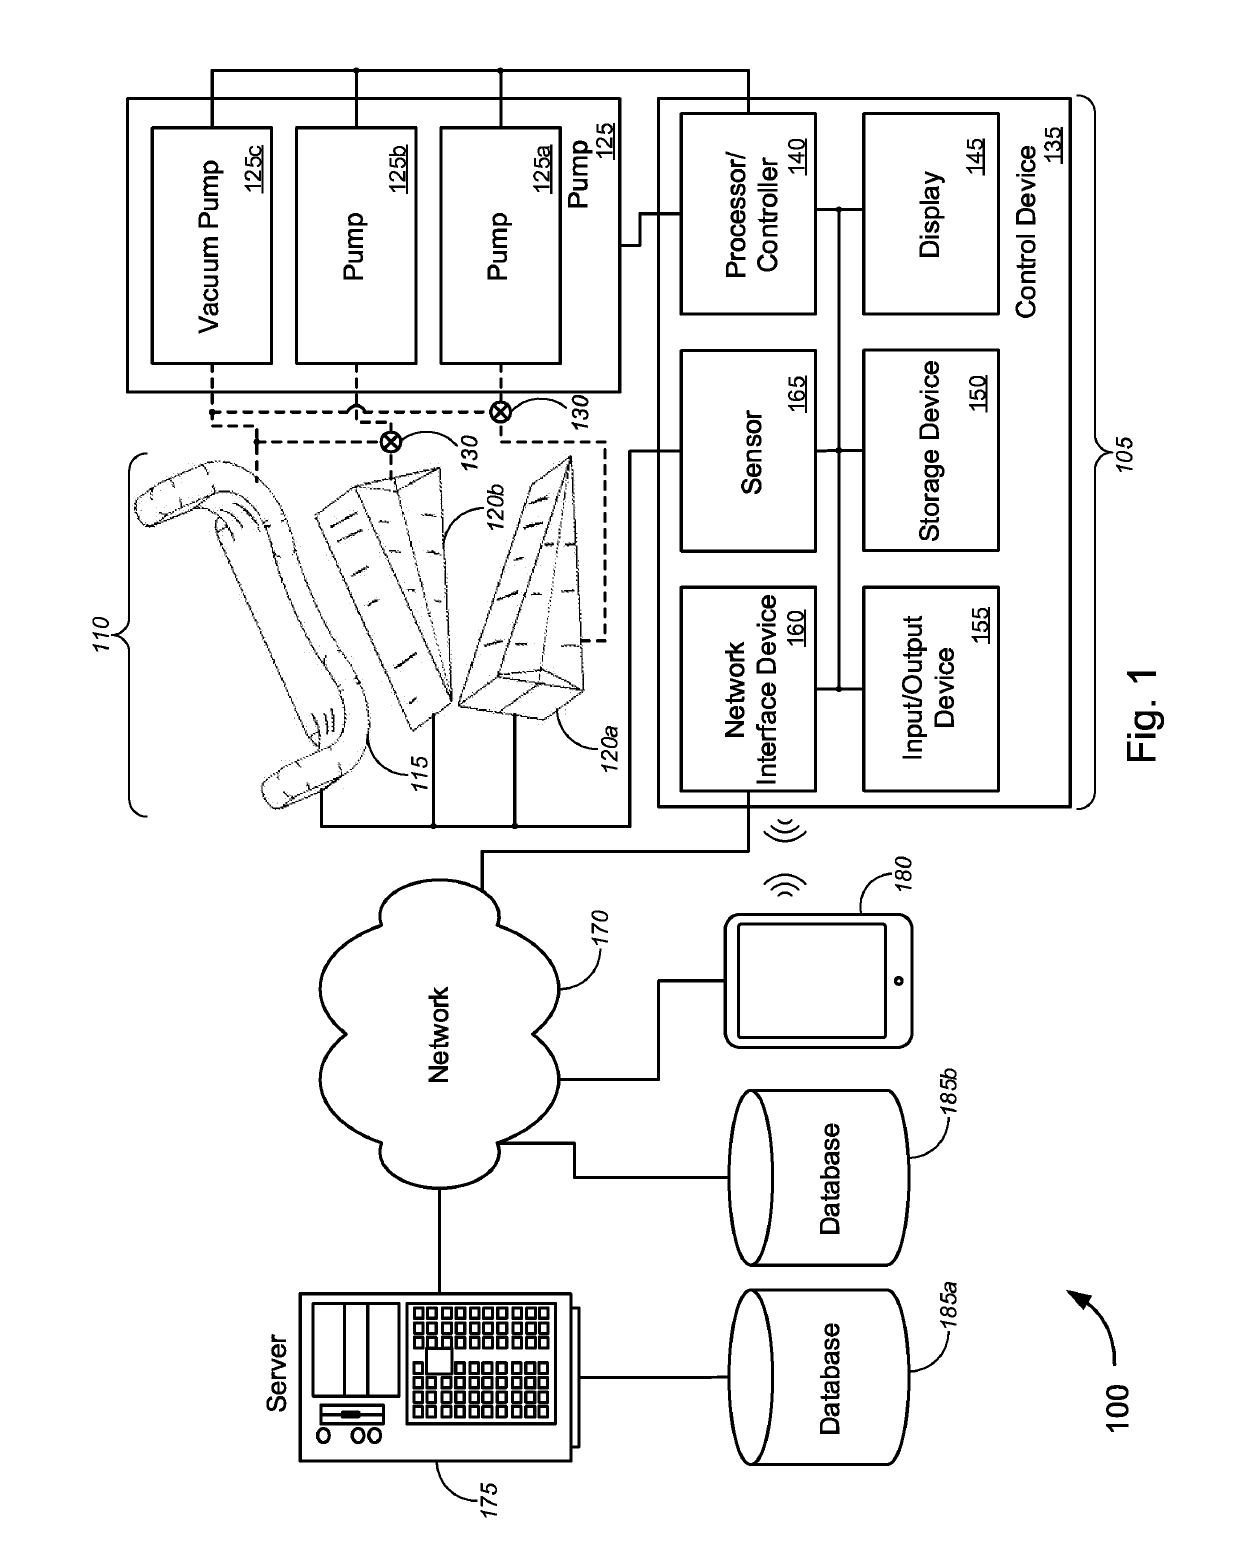 Automatic patient turning and lifting method, system, and apparatus